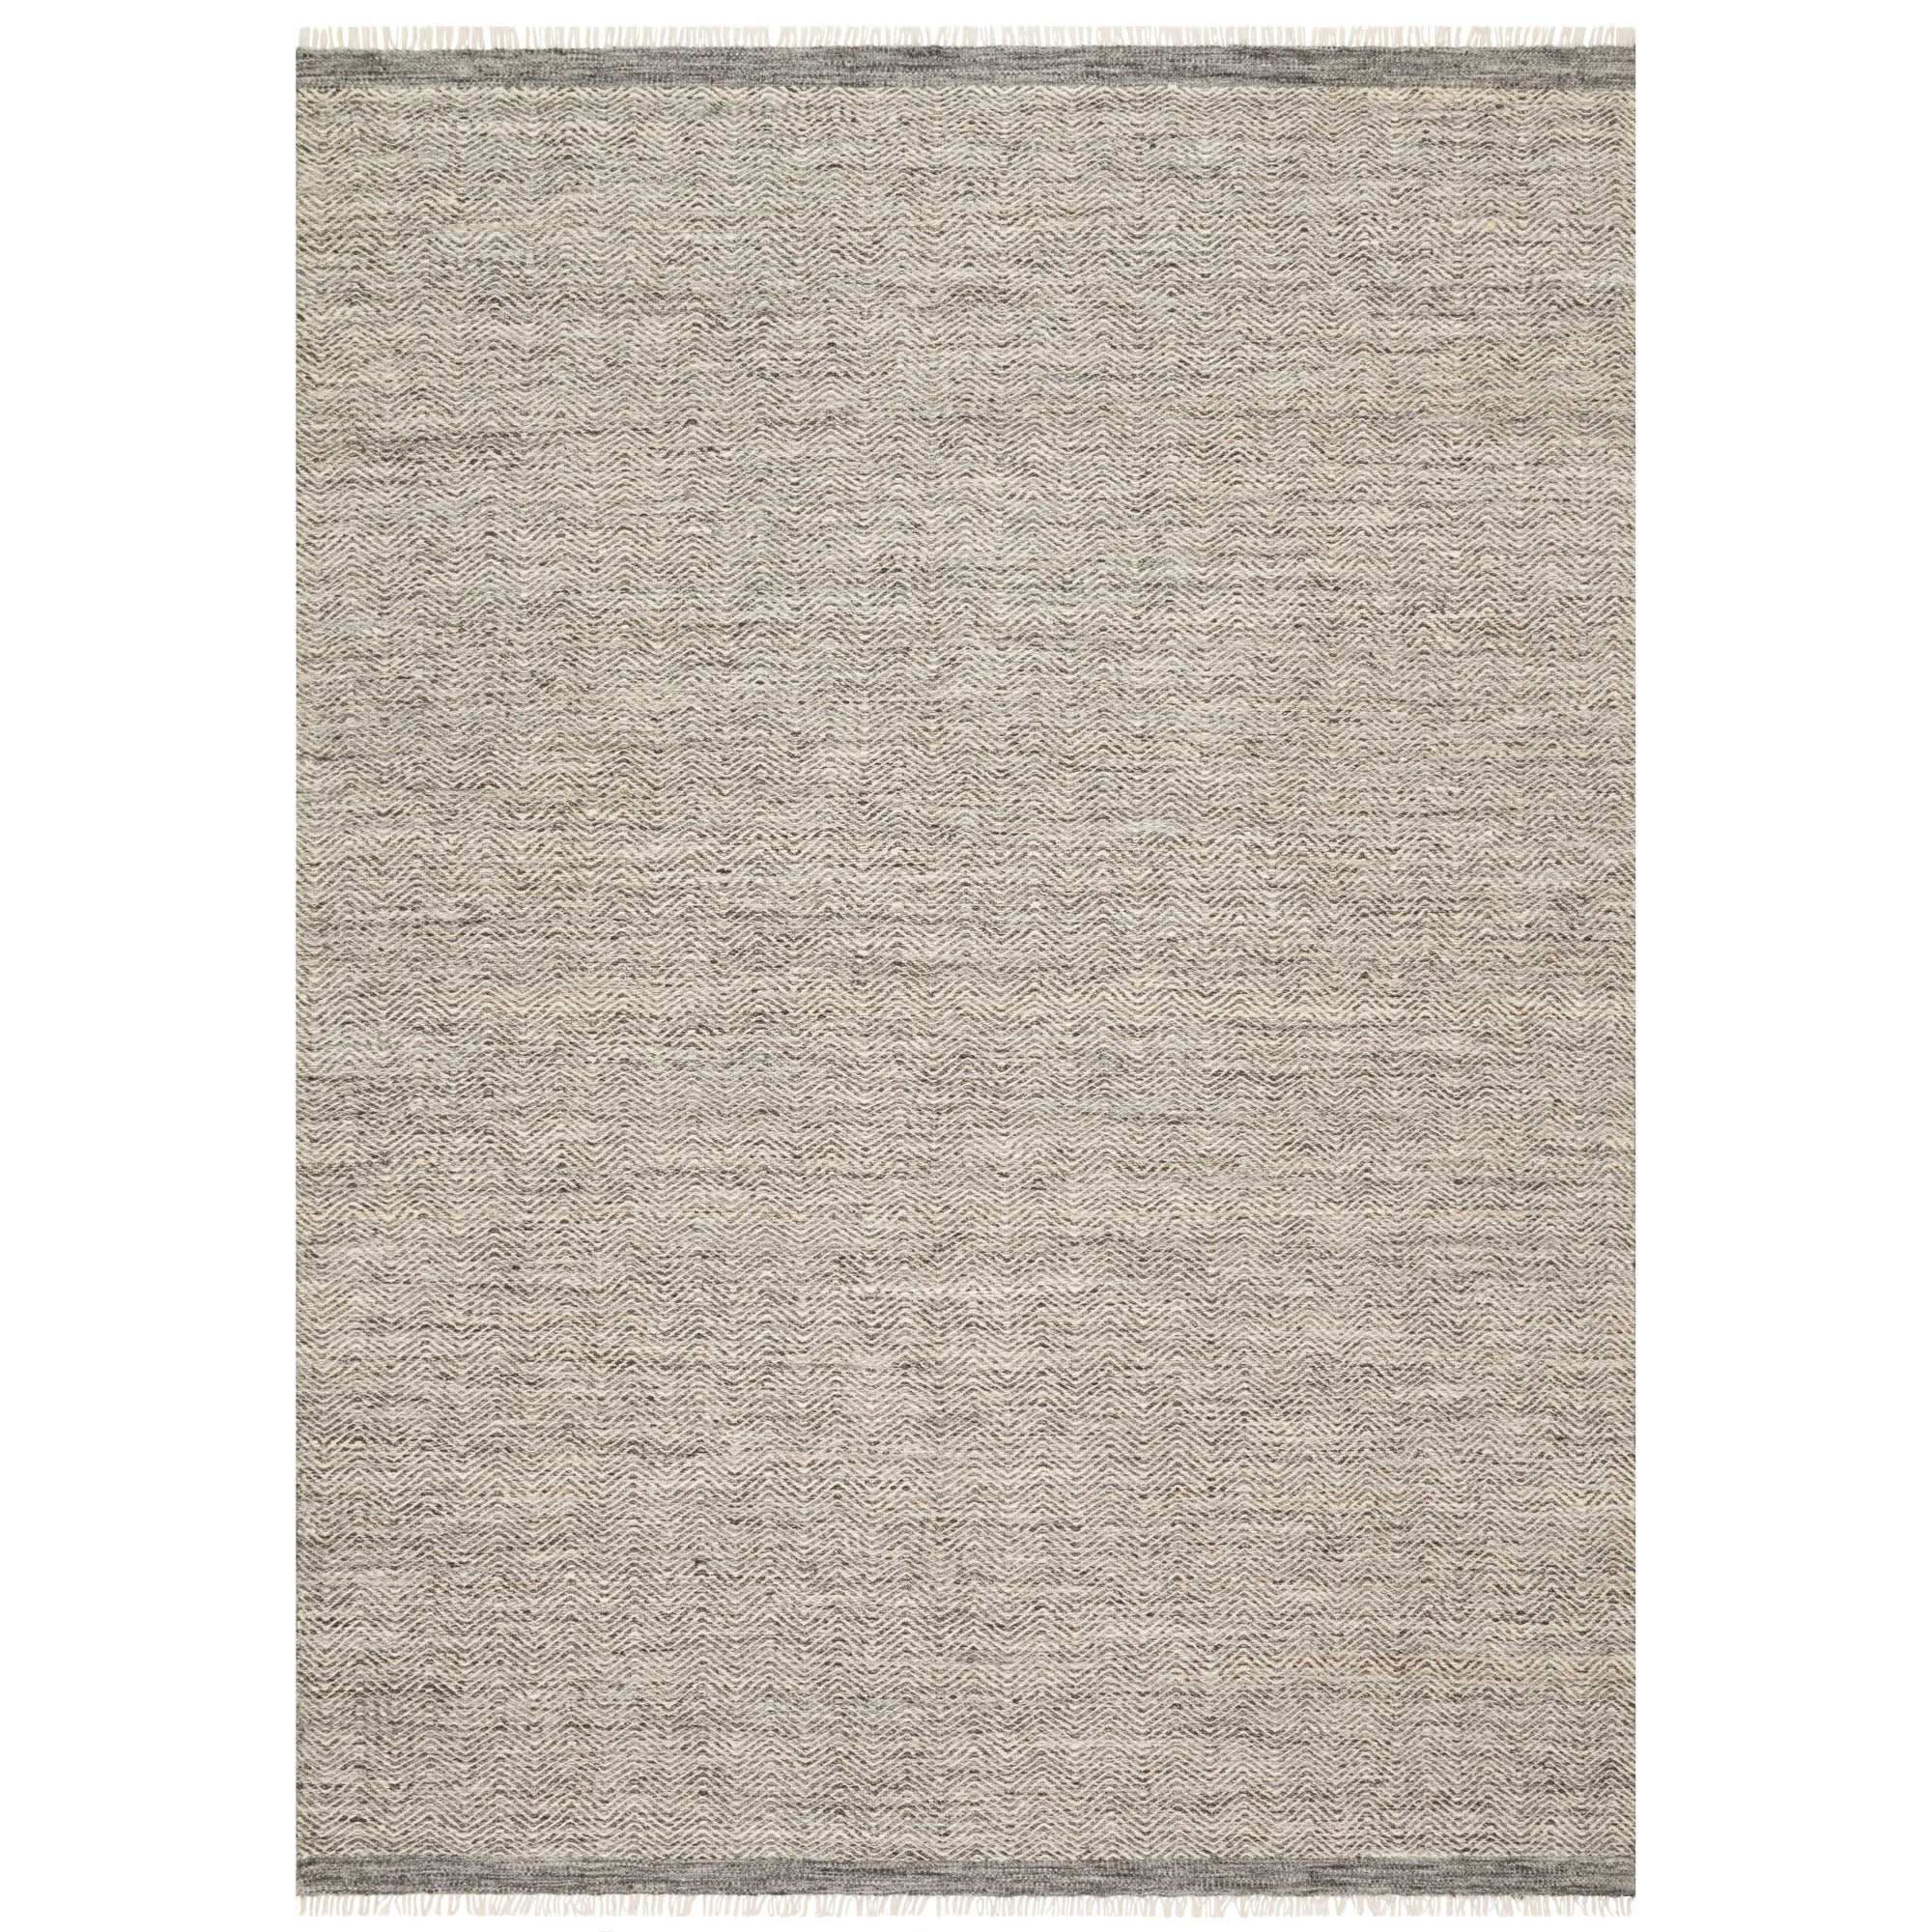 Rugs by Roo Loloi Omen Grey Area Rug in size 3' 6" x 5' 6"